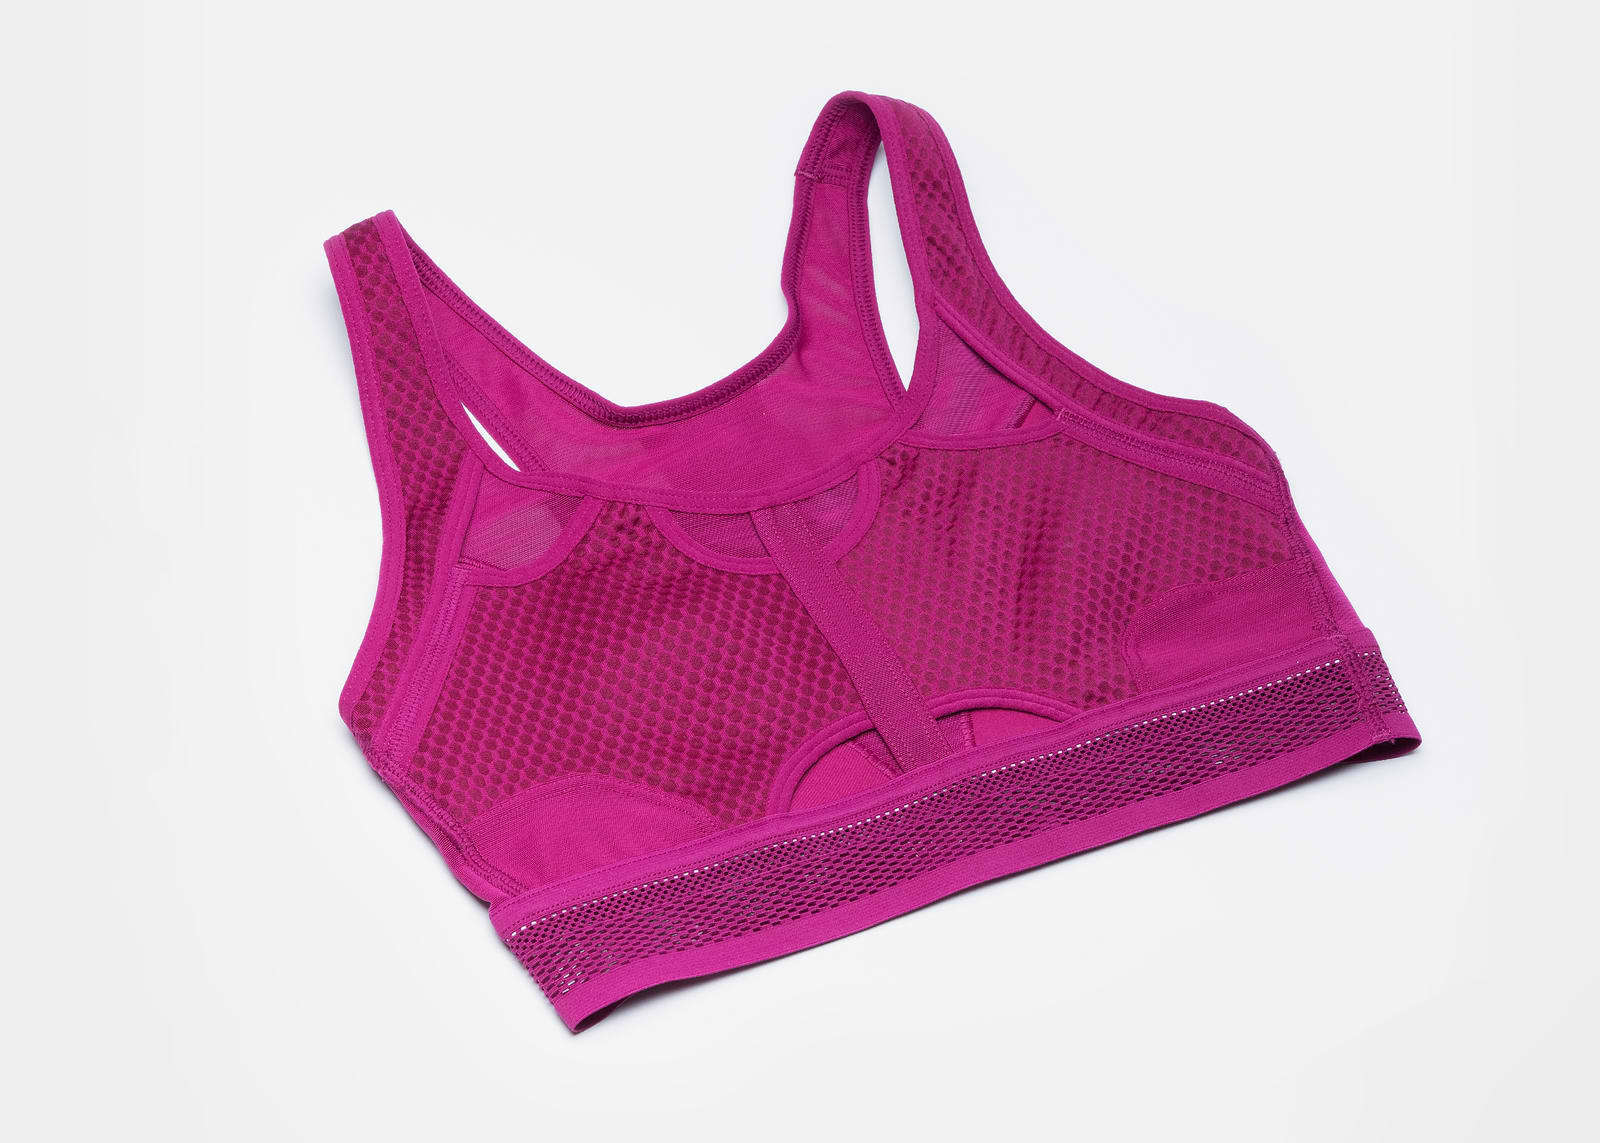 Should Bras Be Washed In Hot Or Cold Water?